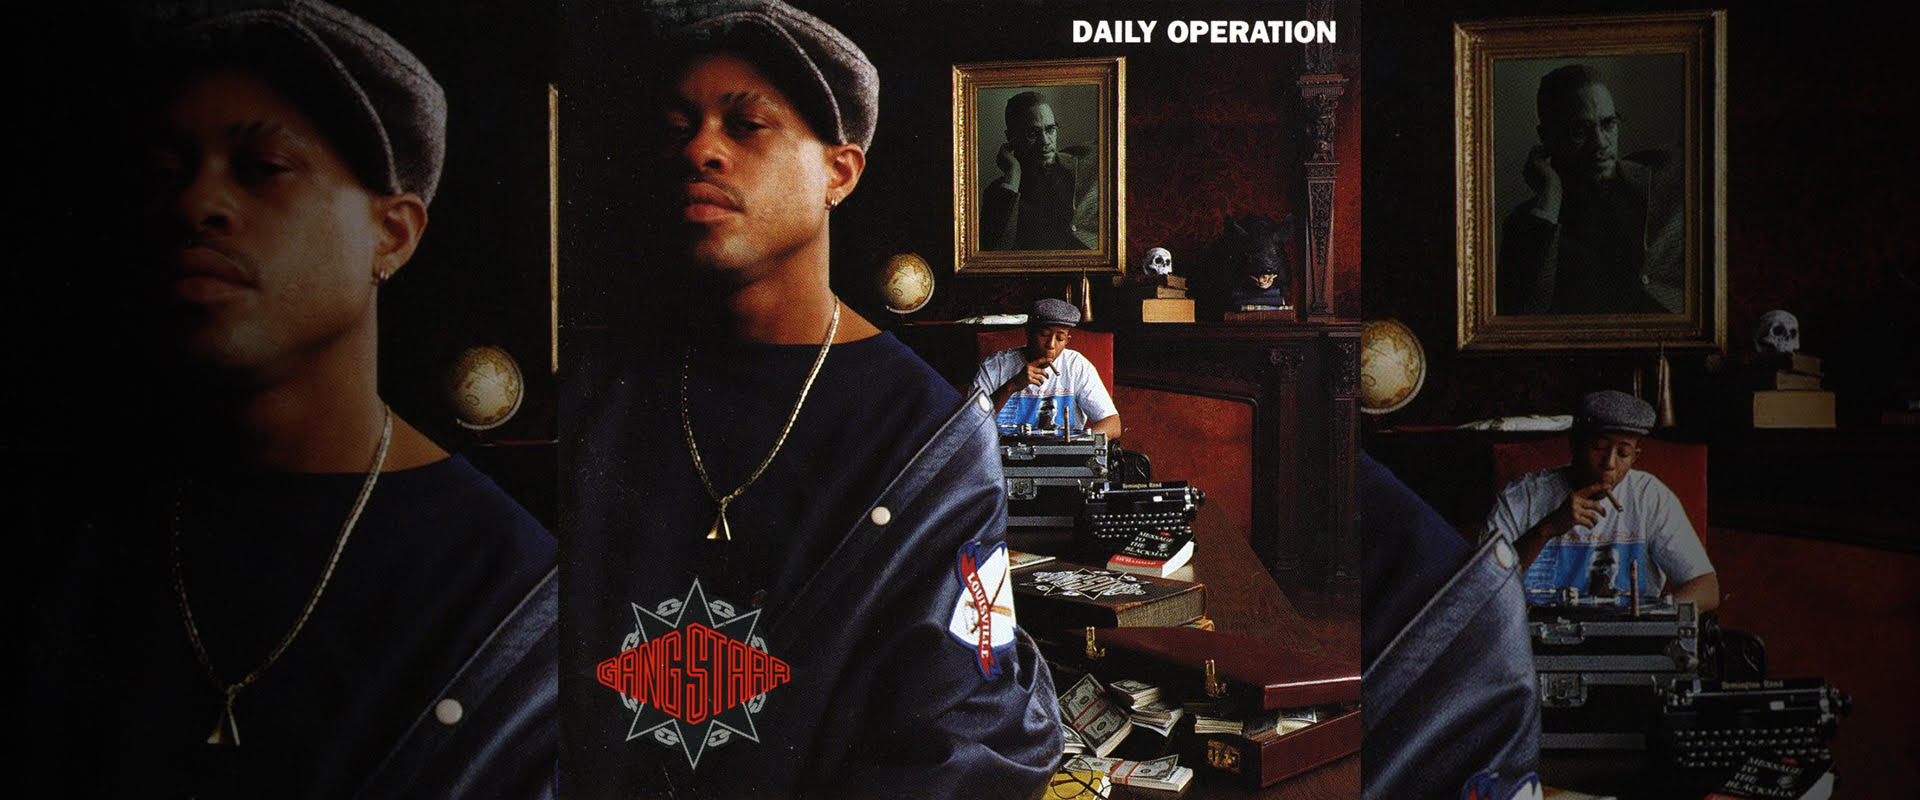 Classic Albums: 'Daily Operation' by Gang Starr